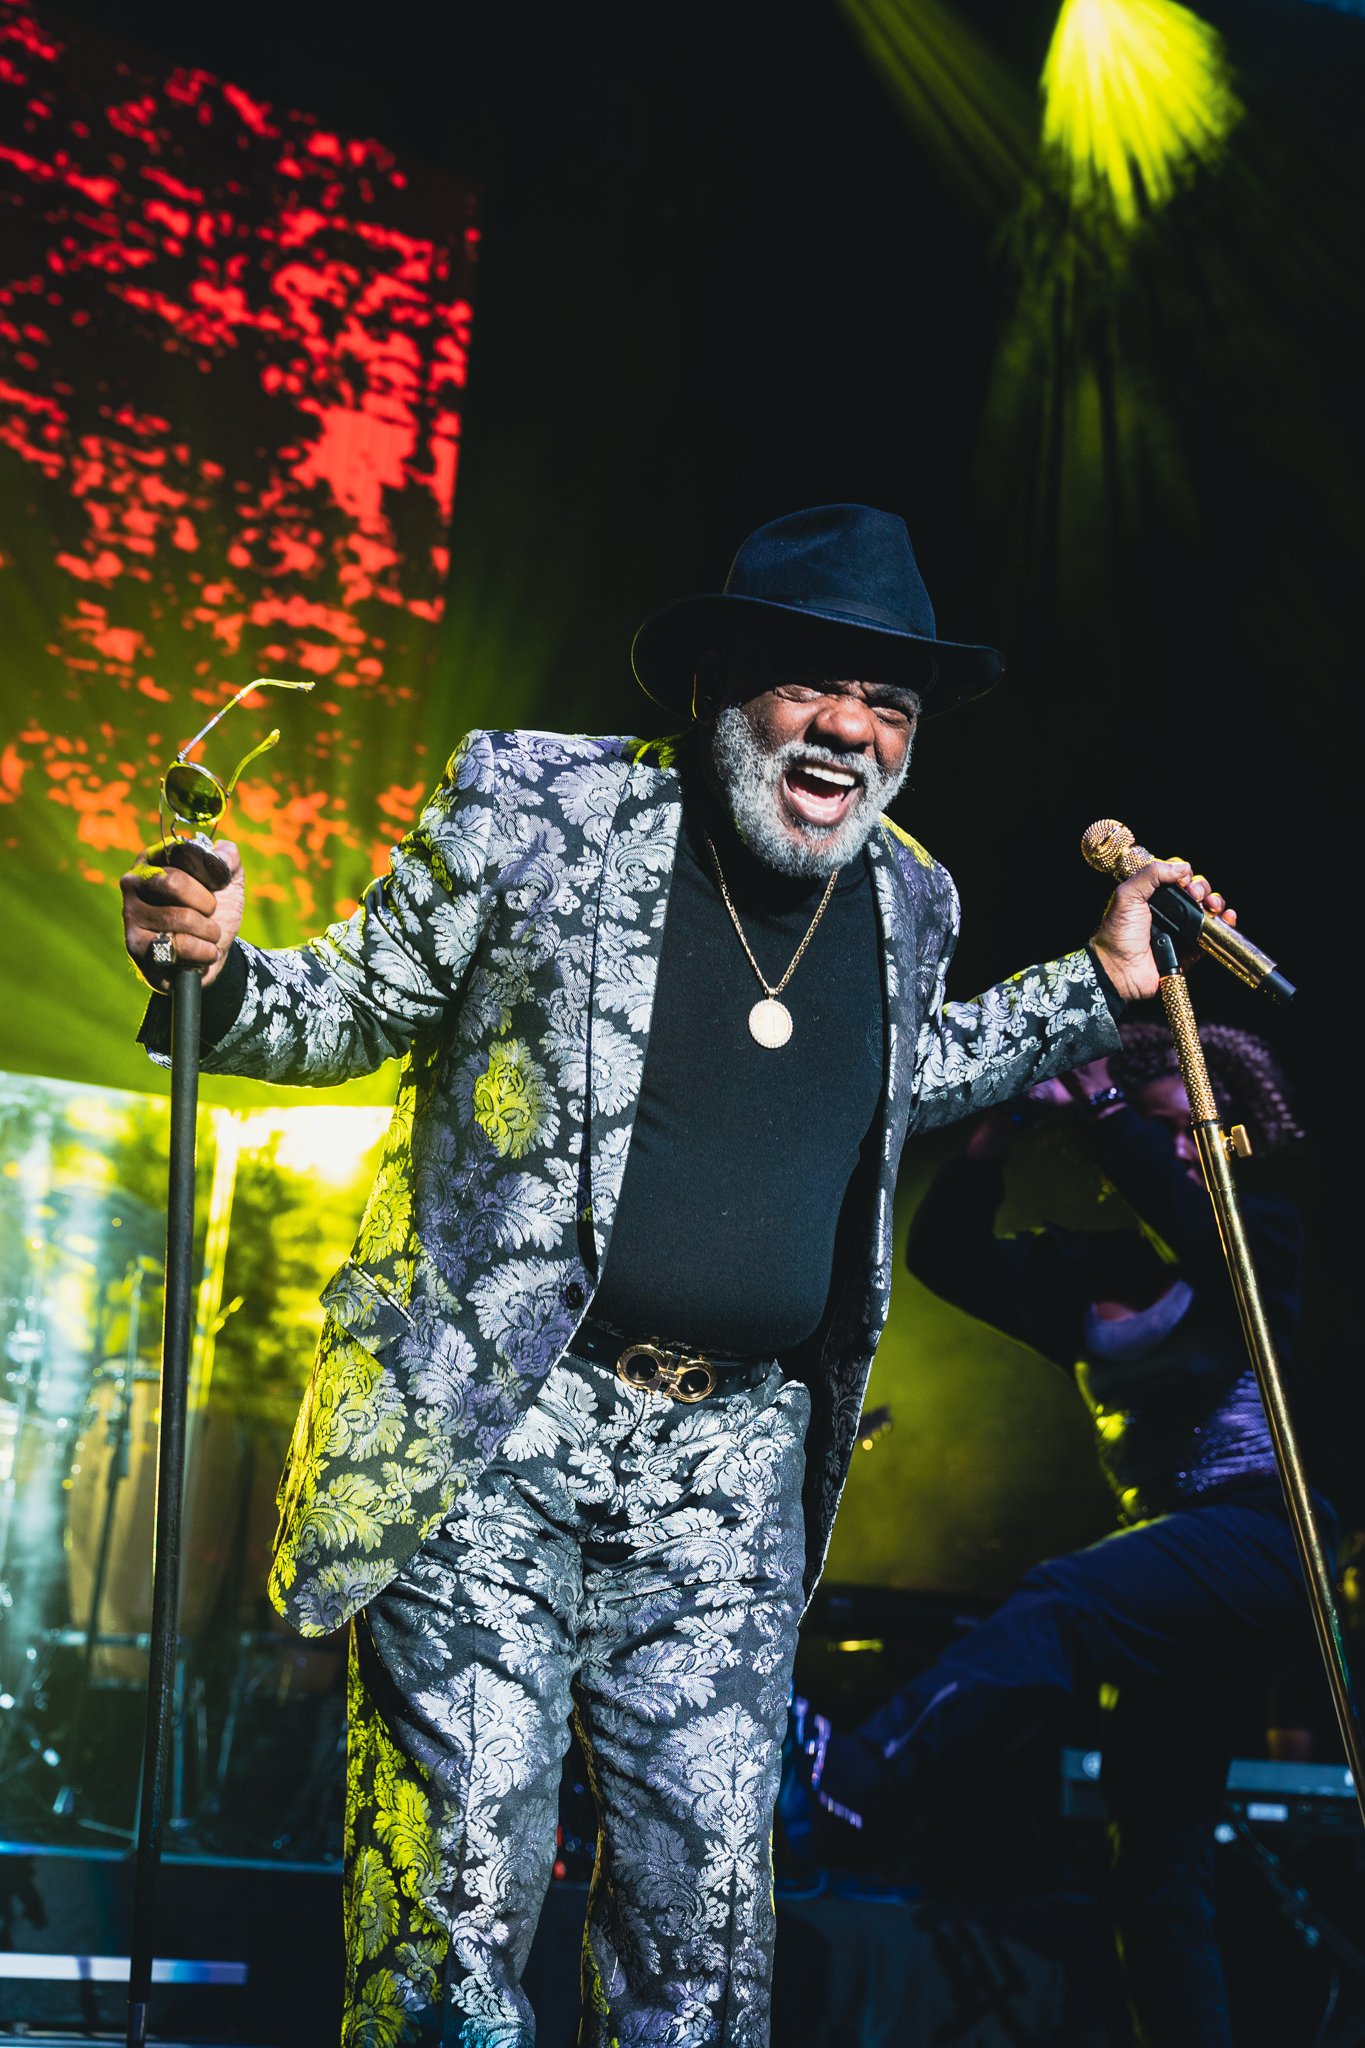 The Isley Brothers Concert - The Isley Brothers-196.JPG